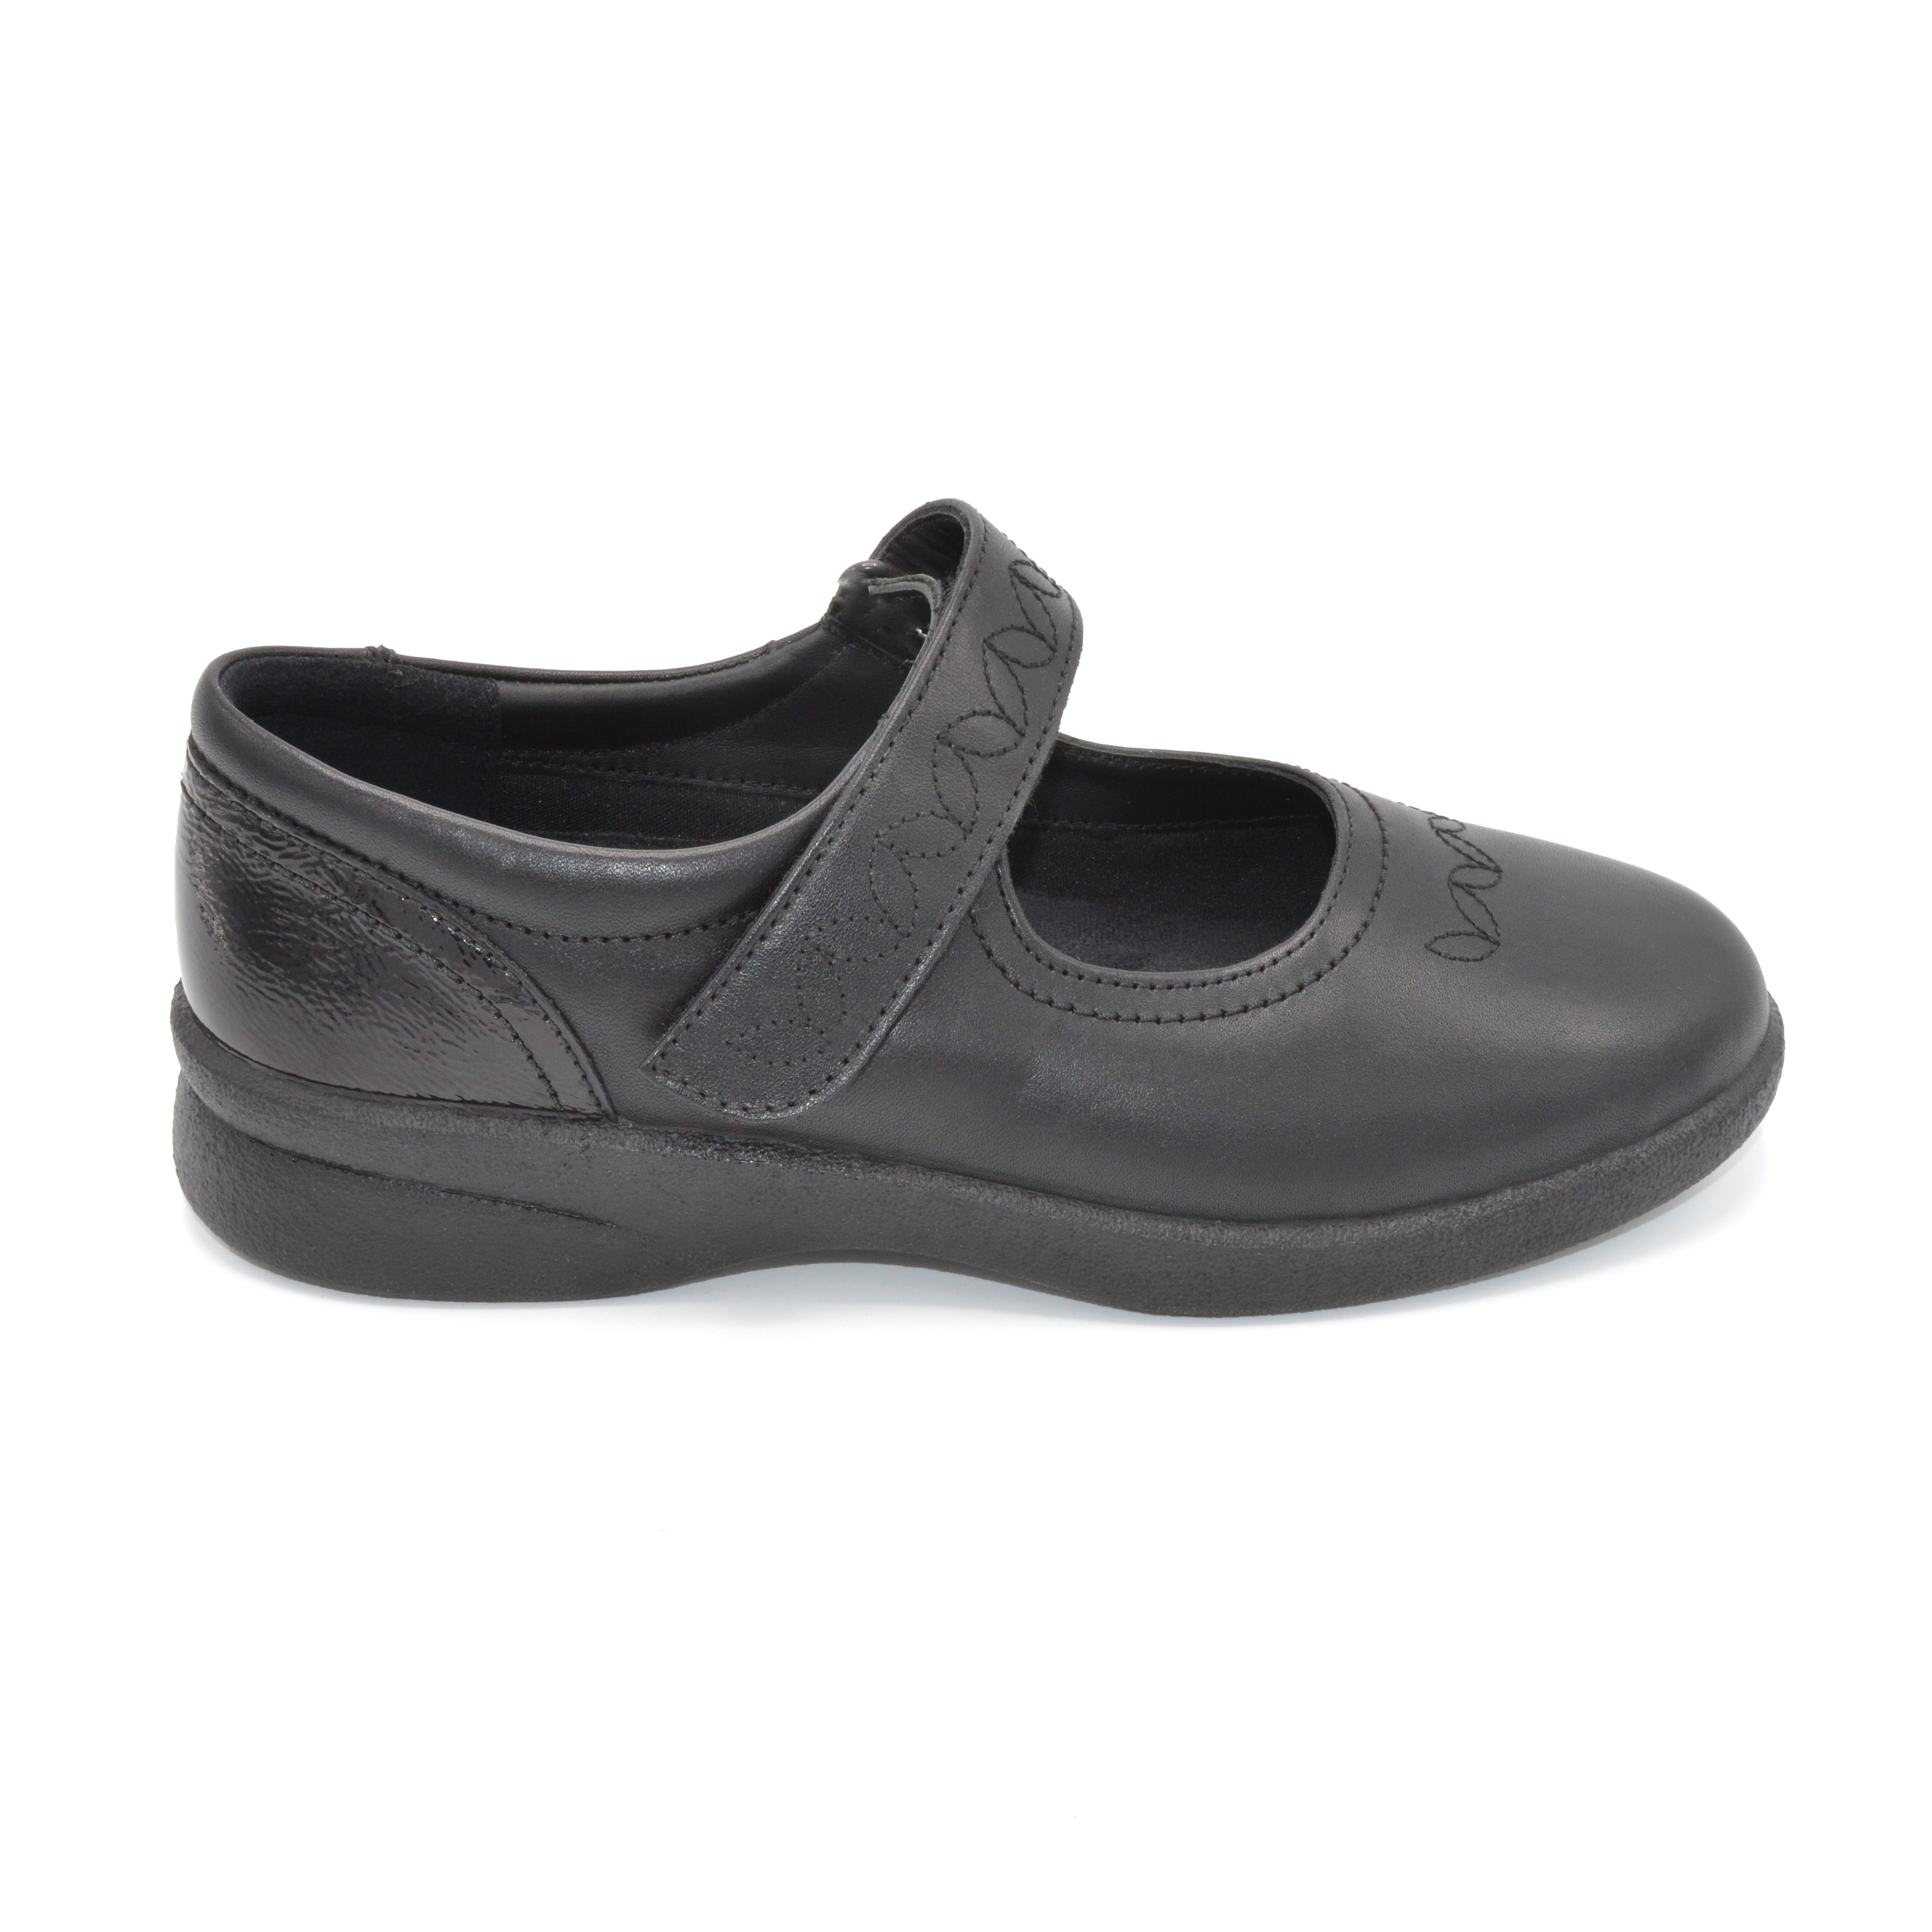 https://www.wideshoes.co.uk/collections/womens-wide-fit-velcro-close-shoes-for-swollen-feet-bunions-orthotics/products/padders-sprite-ladies-wide-fitting-mary-jane-shoe-black-velcro-close